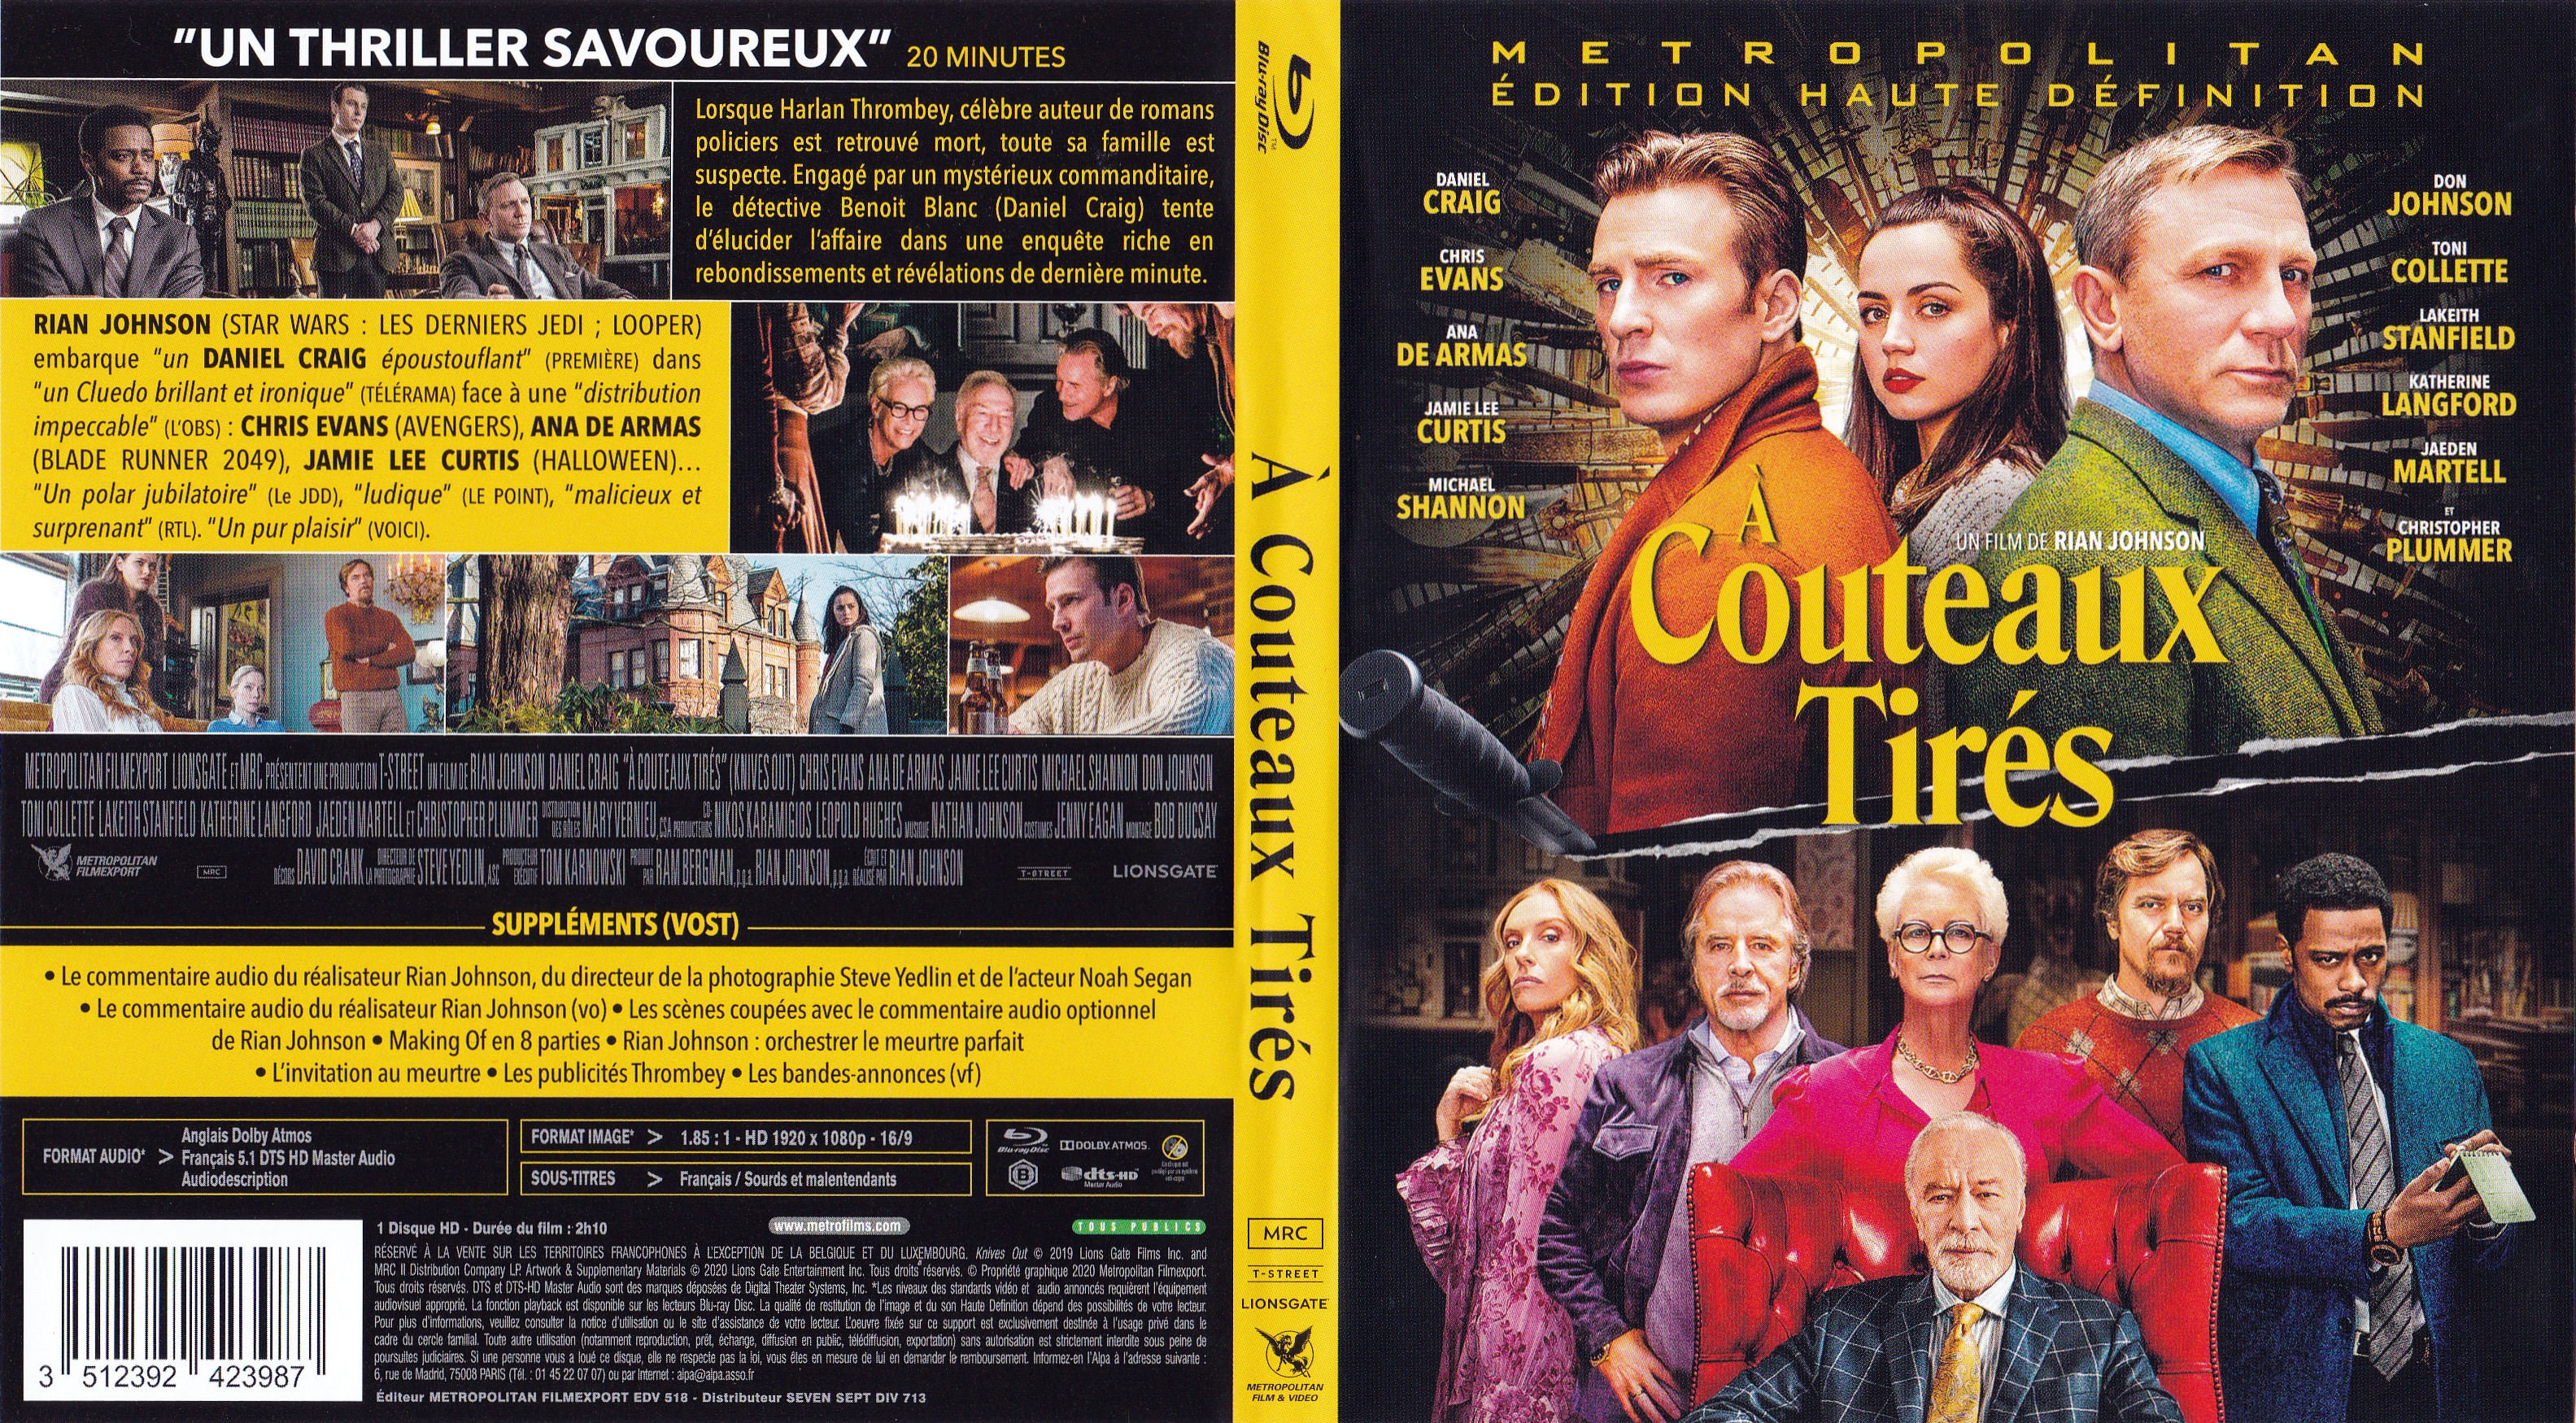 Jaquette DVD A couteaux tirs (BLU-RAY)